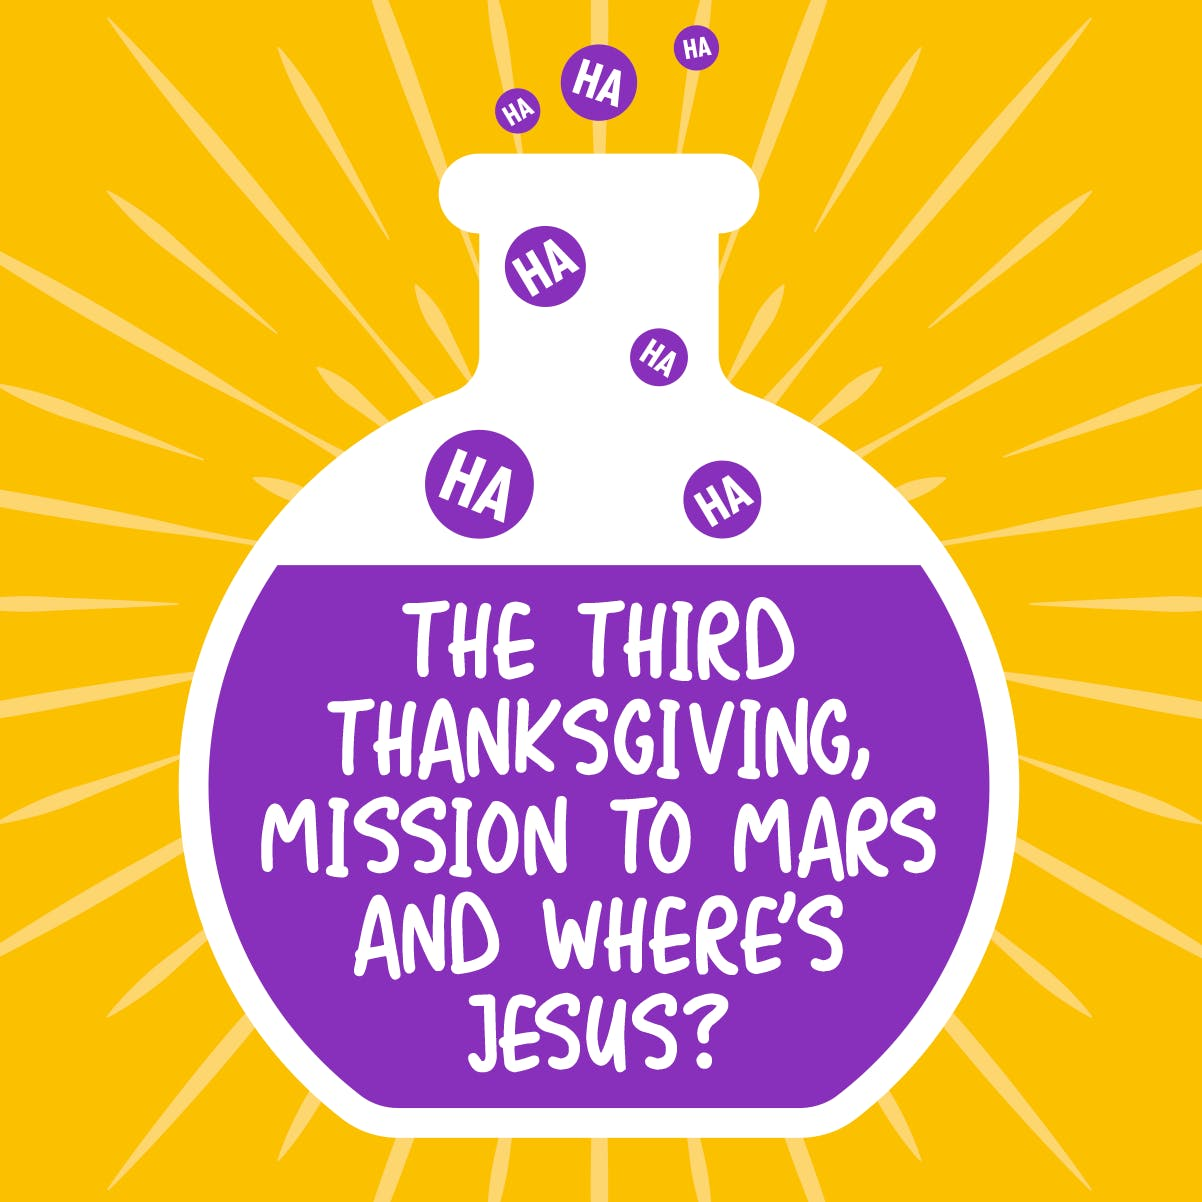 The Third Thanksgiving, Mission to Mars and Where’s Jesus?